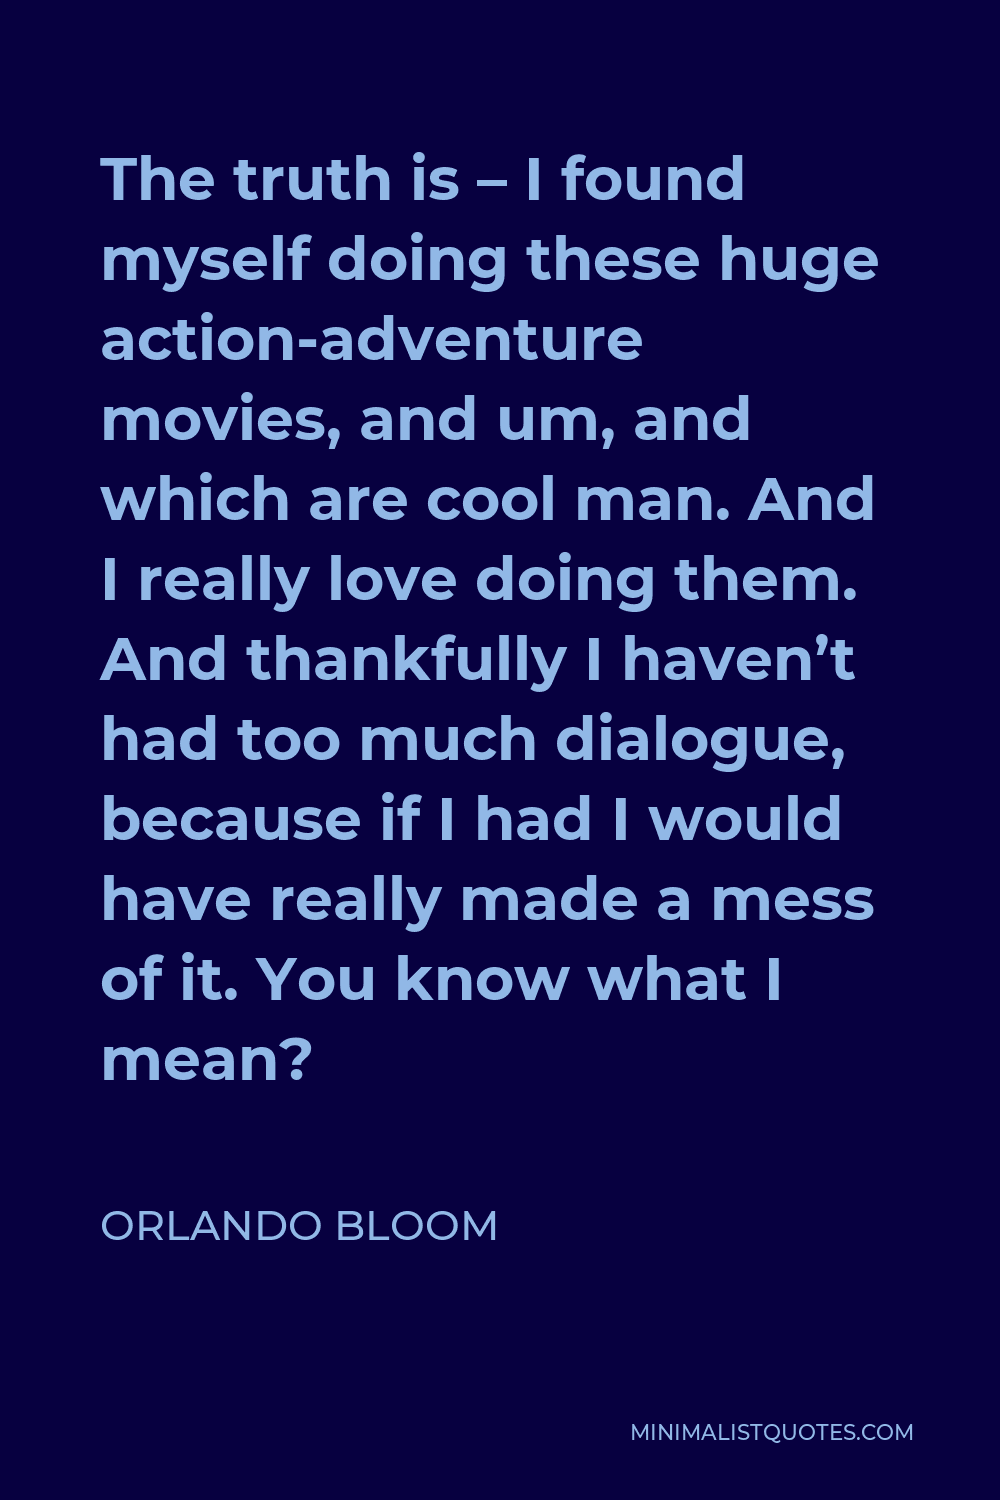 Orlando Bloom Quote - The truth is – I found myself doing these huge action-adventure movies, and um, and which are cool man. And I really love doing them. And thankfully I haven’t had too much dialogue, because if I had I would have really made a mess of it. You know what I mean?